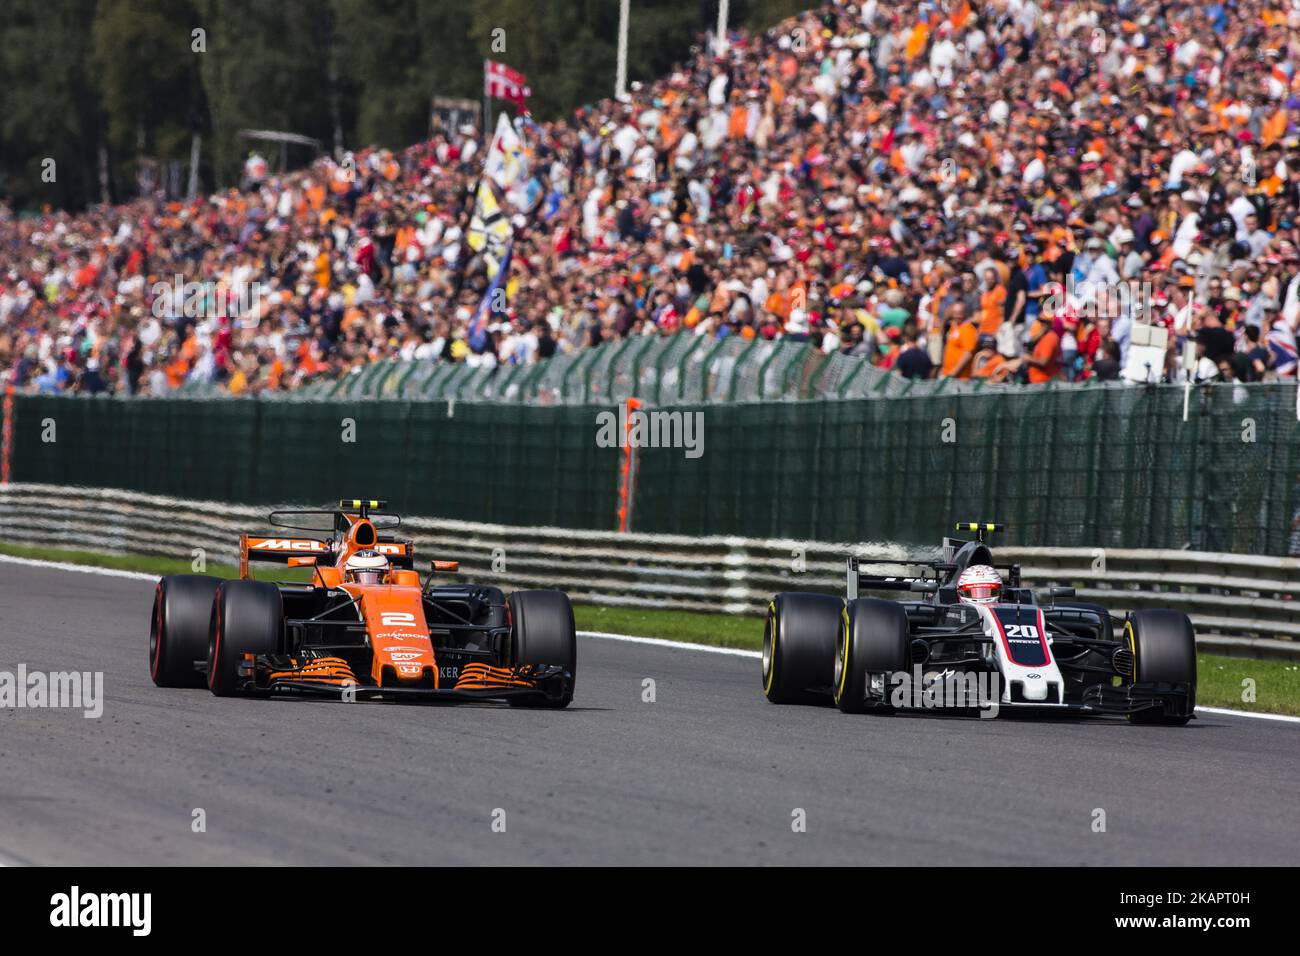 02 VANDOORNE Stoffel from Belgium of McLaren Honda ahead of 20 MAGNUSSEN Kevin from Denmark of Haas F1 team during the Formula One Belgian Grand Prix at Circuit de Spa-Francorchamps on August 27, 2017 in Spa, Belgium. (Photo by Xavier Bonilla/NurPhoto) Stock Photo